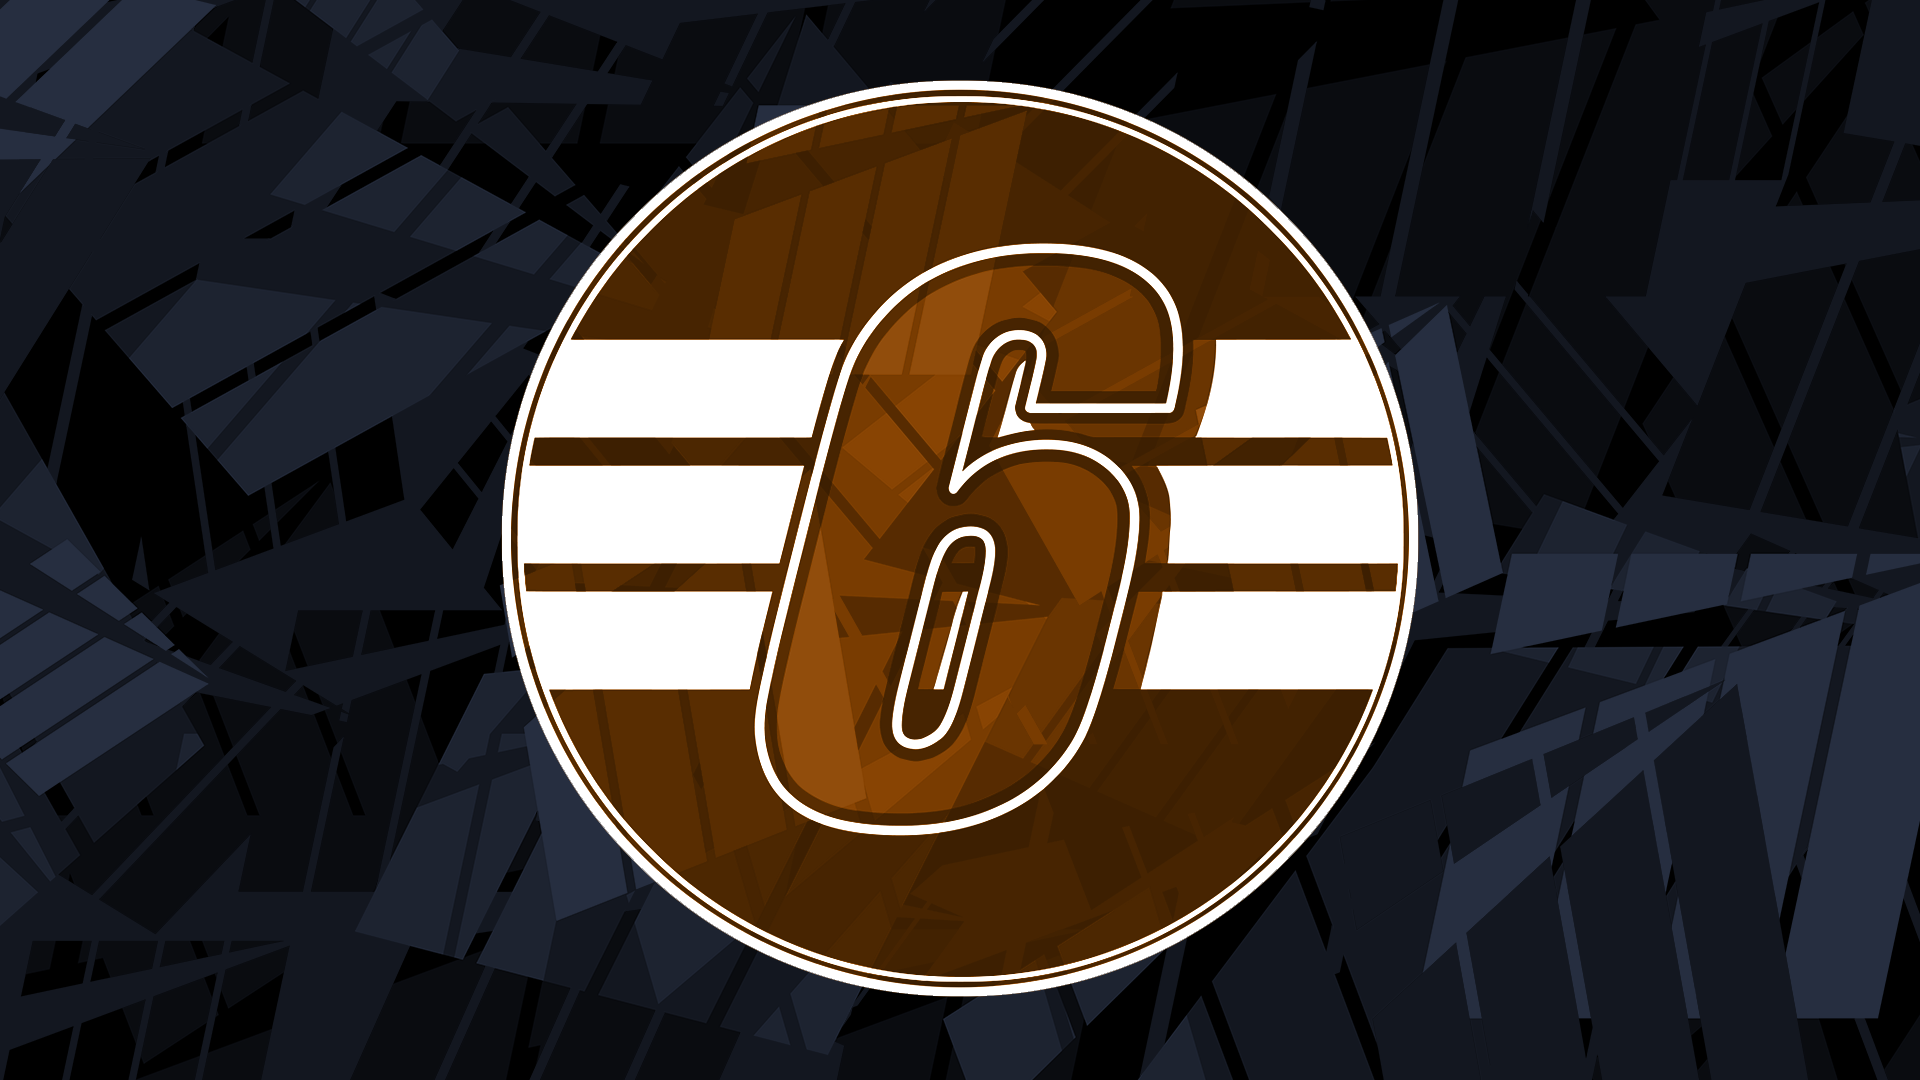 Icon for Straight Six